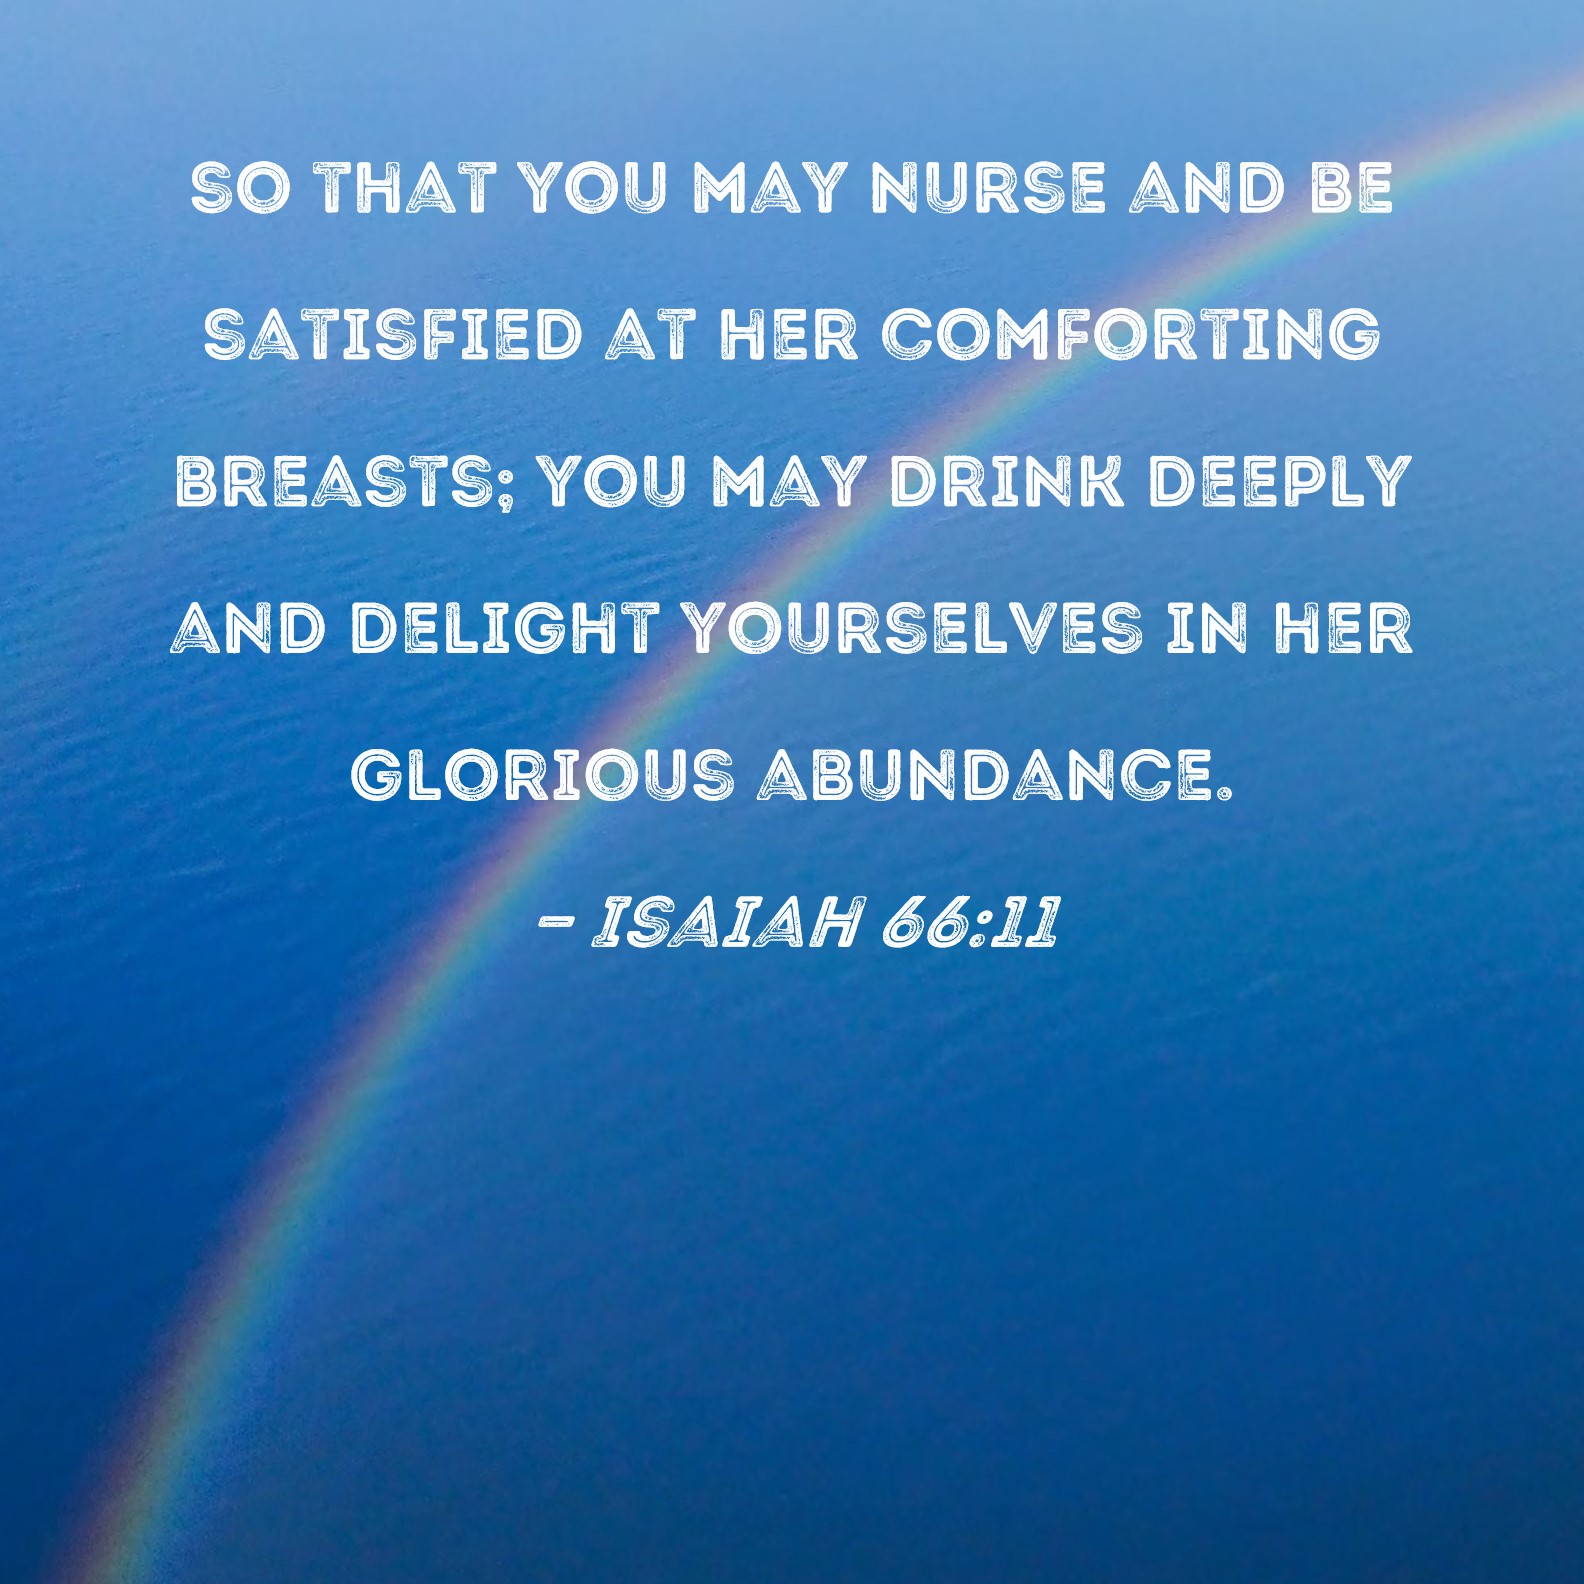 Isaiah 6611 so that you may nurse and be satisfied at her comforting breasts; you may drink deeply and delight yourselves in her glorious abundance. hq pic